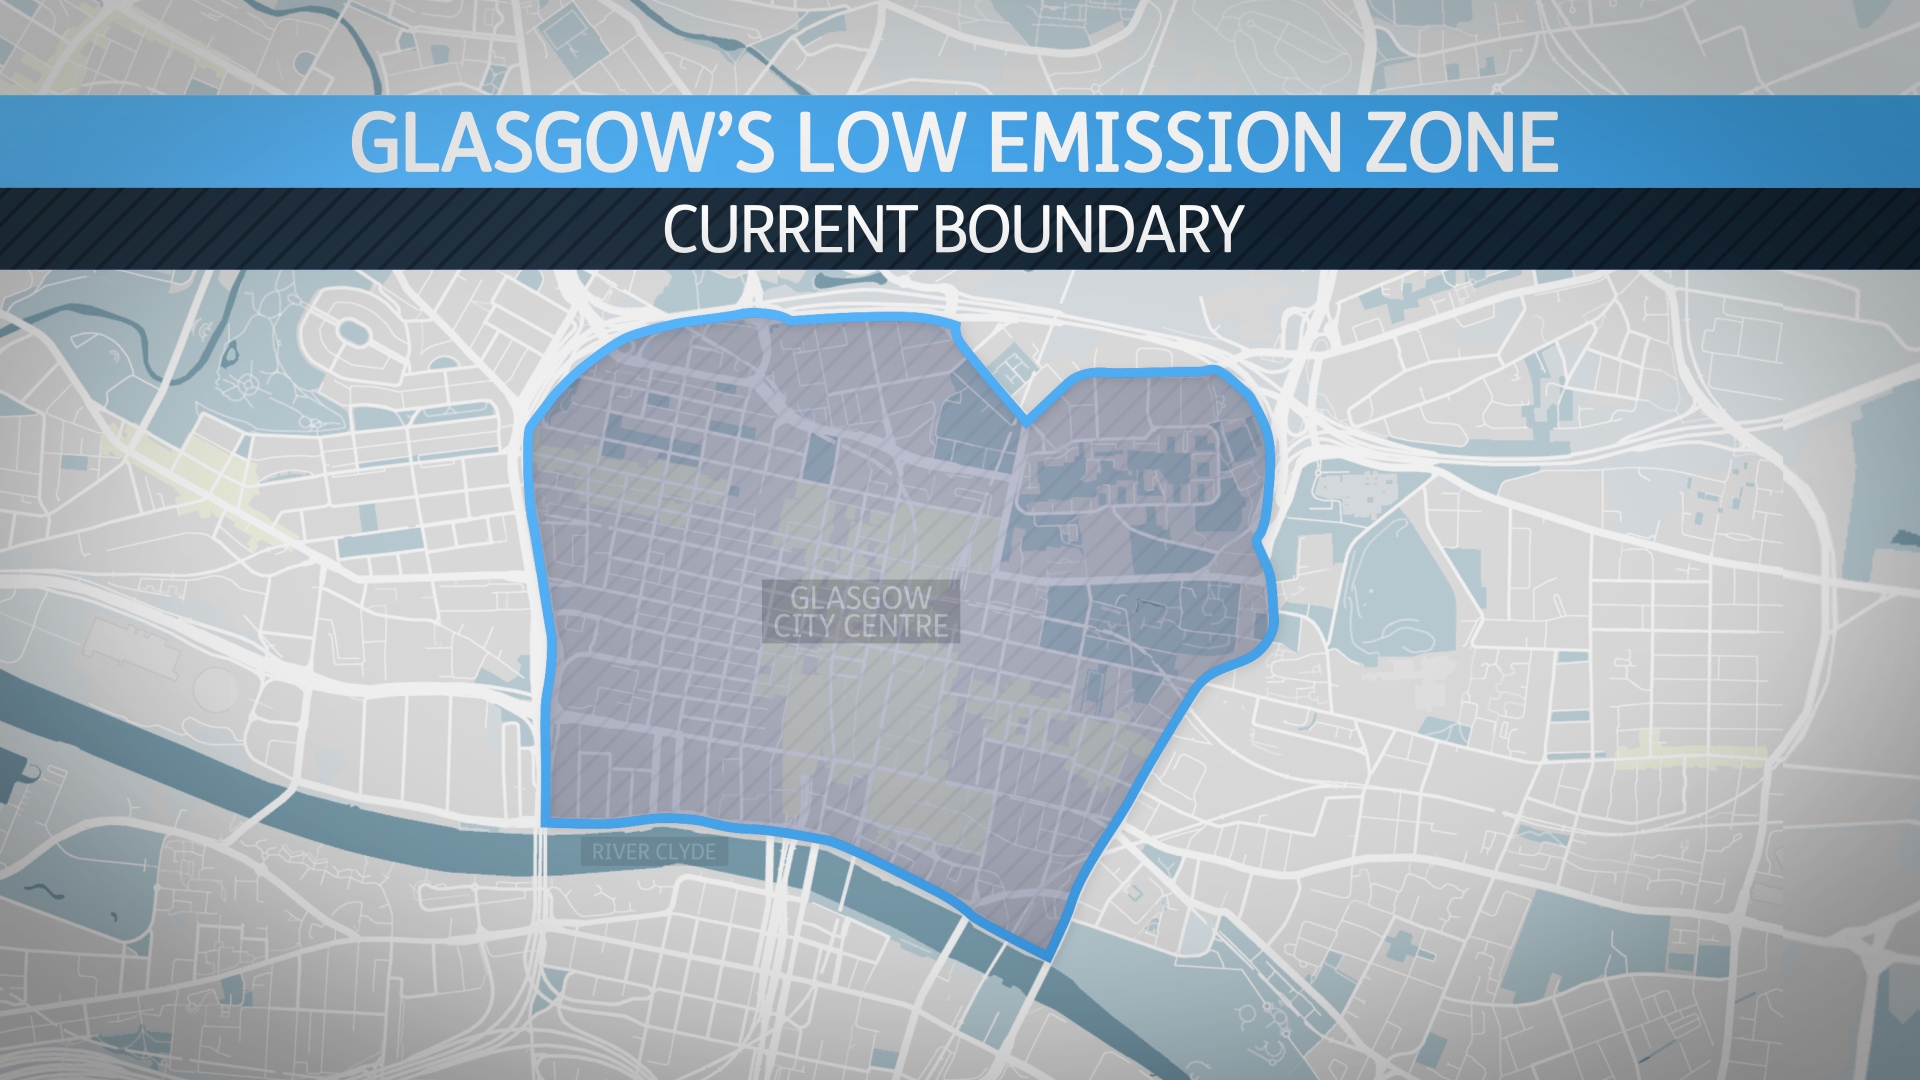 The Low Emissions Zone covers almost the entirety of Glasgow's city centre.